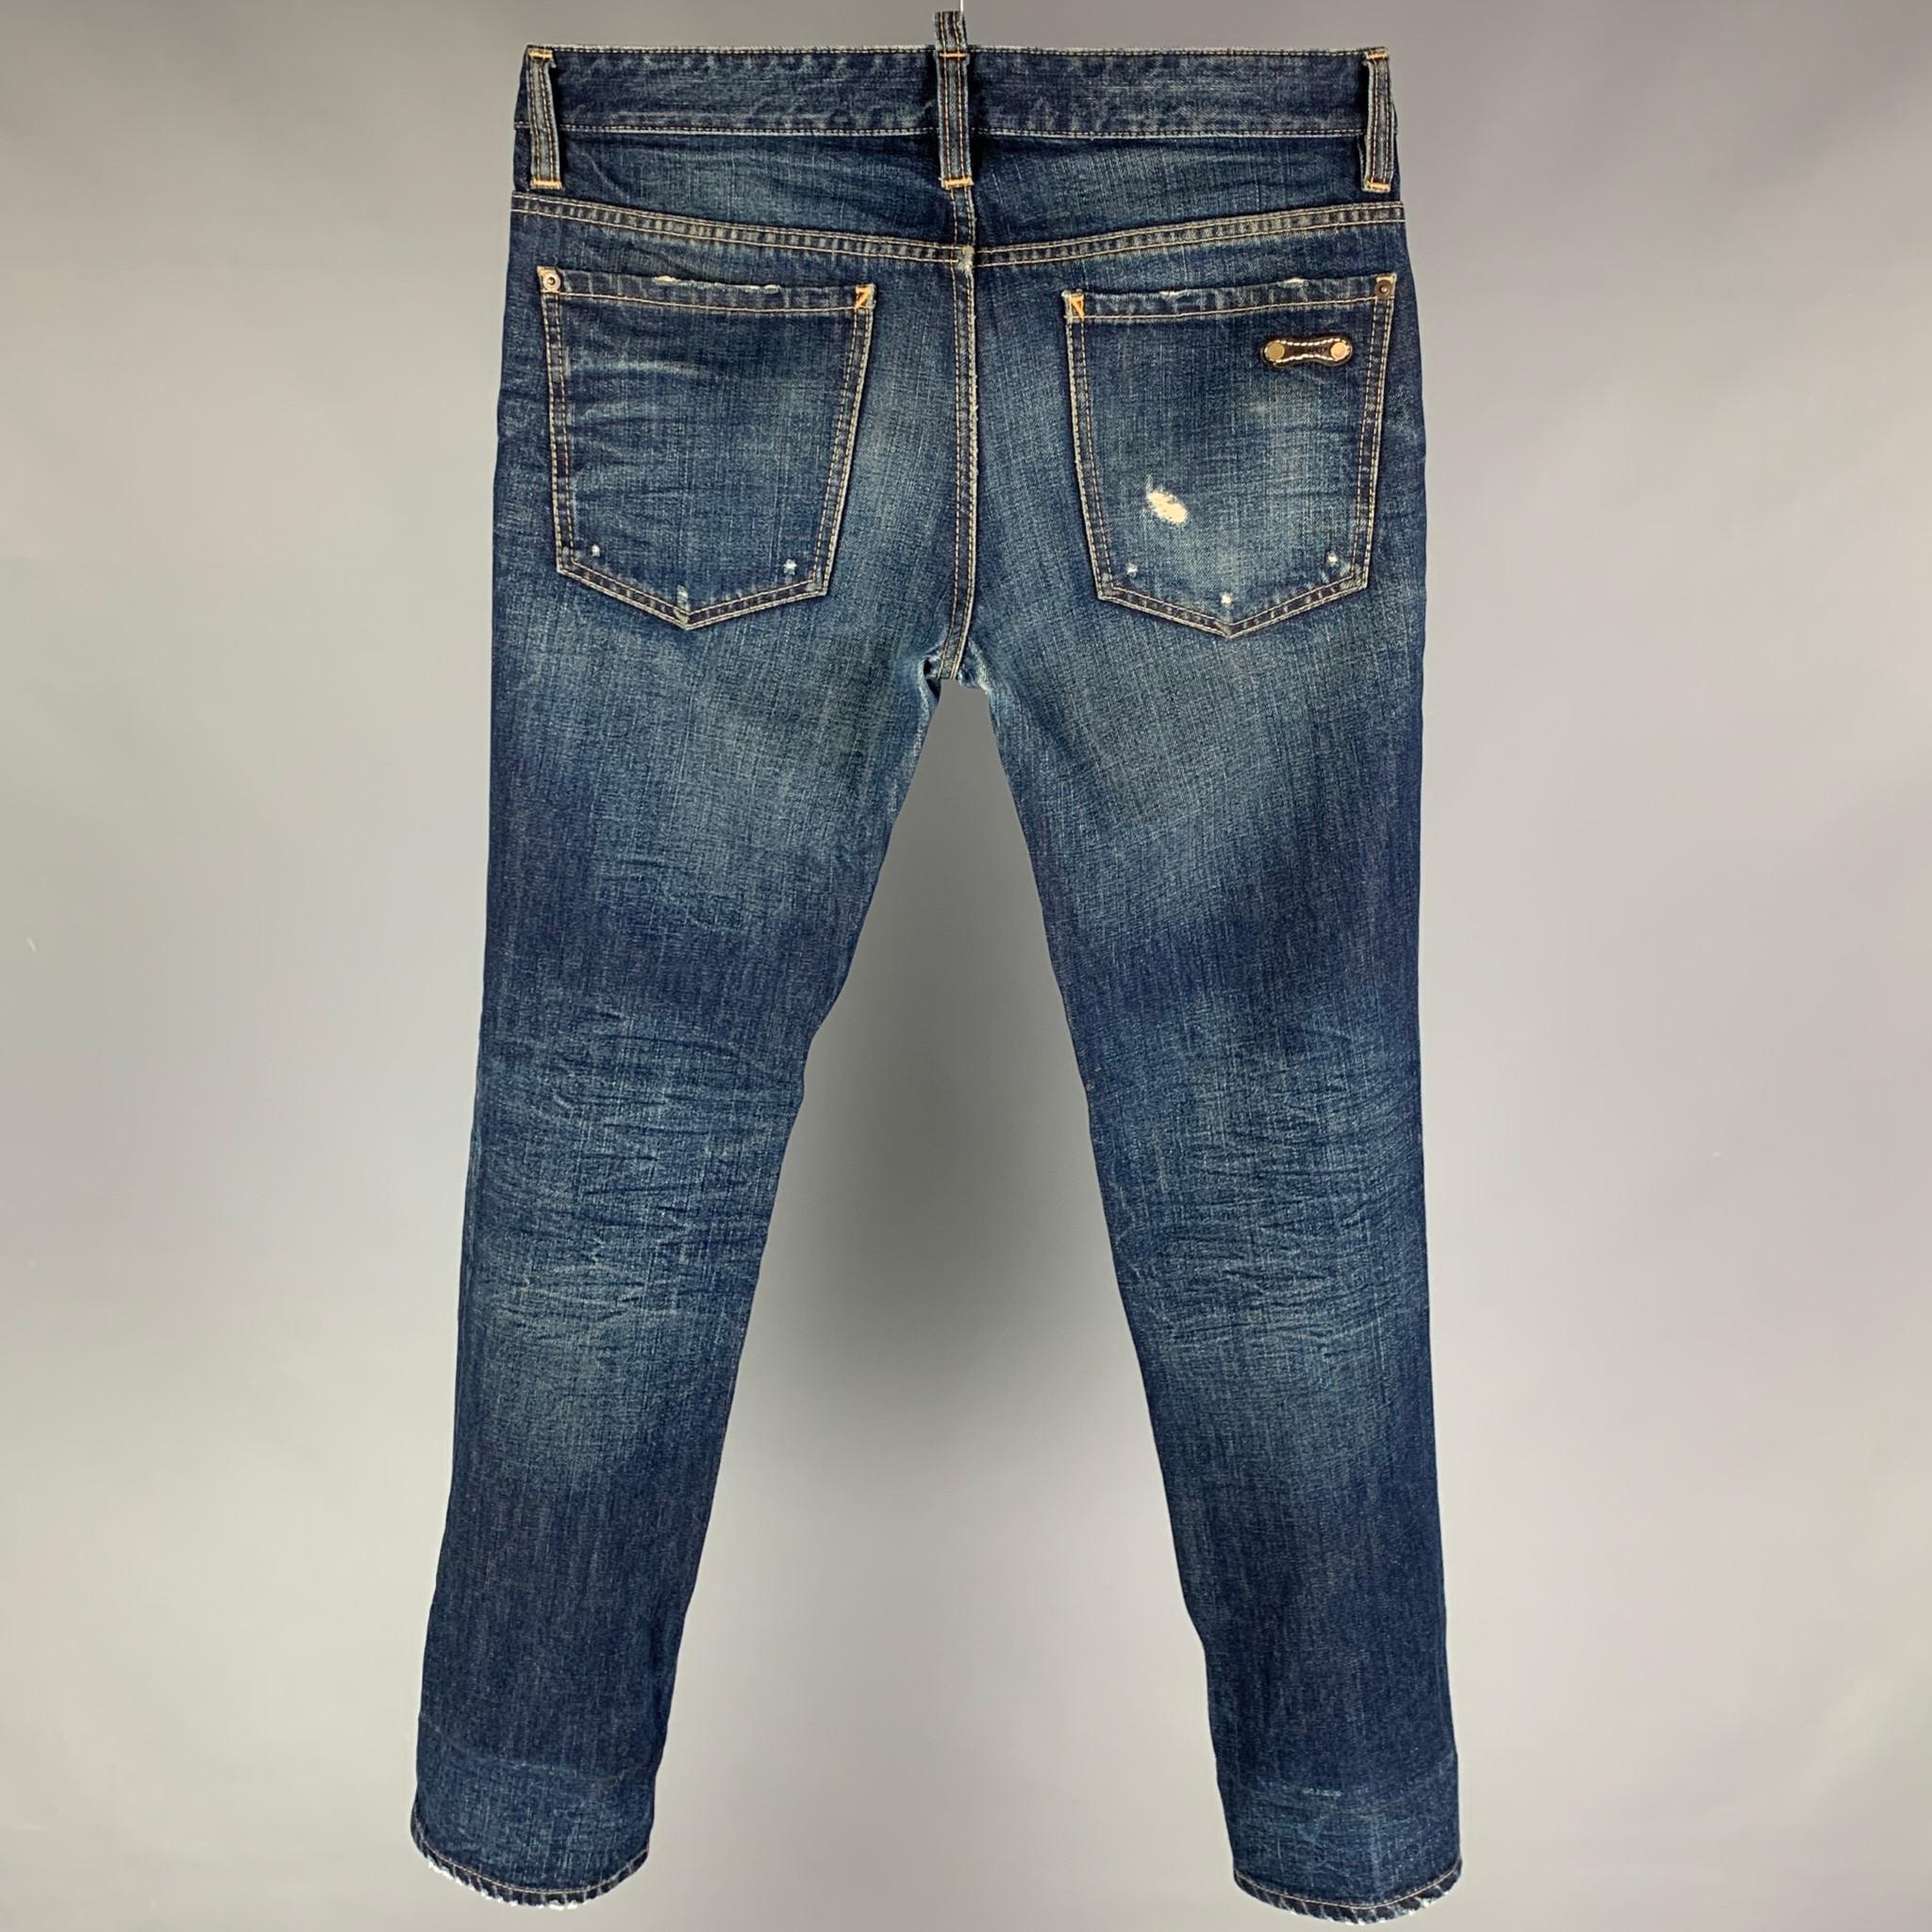 DSQUARED2 jeans comes in a blue distressed material featuring a skinny fit, contrast stitching, and a button fly closure. Made in Italy.

Very Good Pre-Owned Condition.
Marked: 46

Measurements:

Waist: 33 in.
Rise: 10 in.
Inseam: 32 in. 